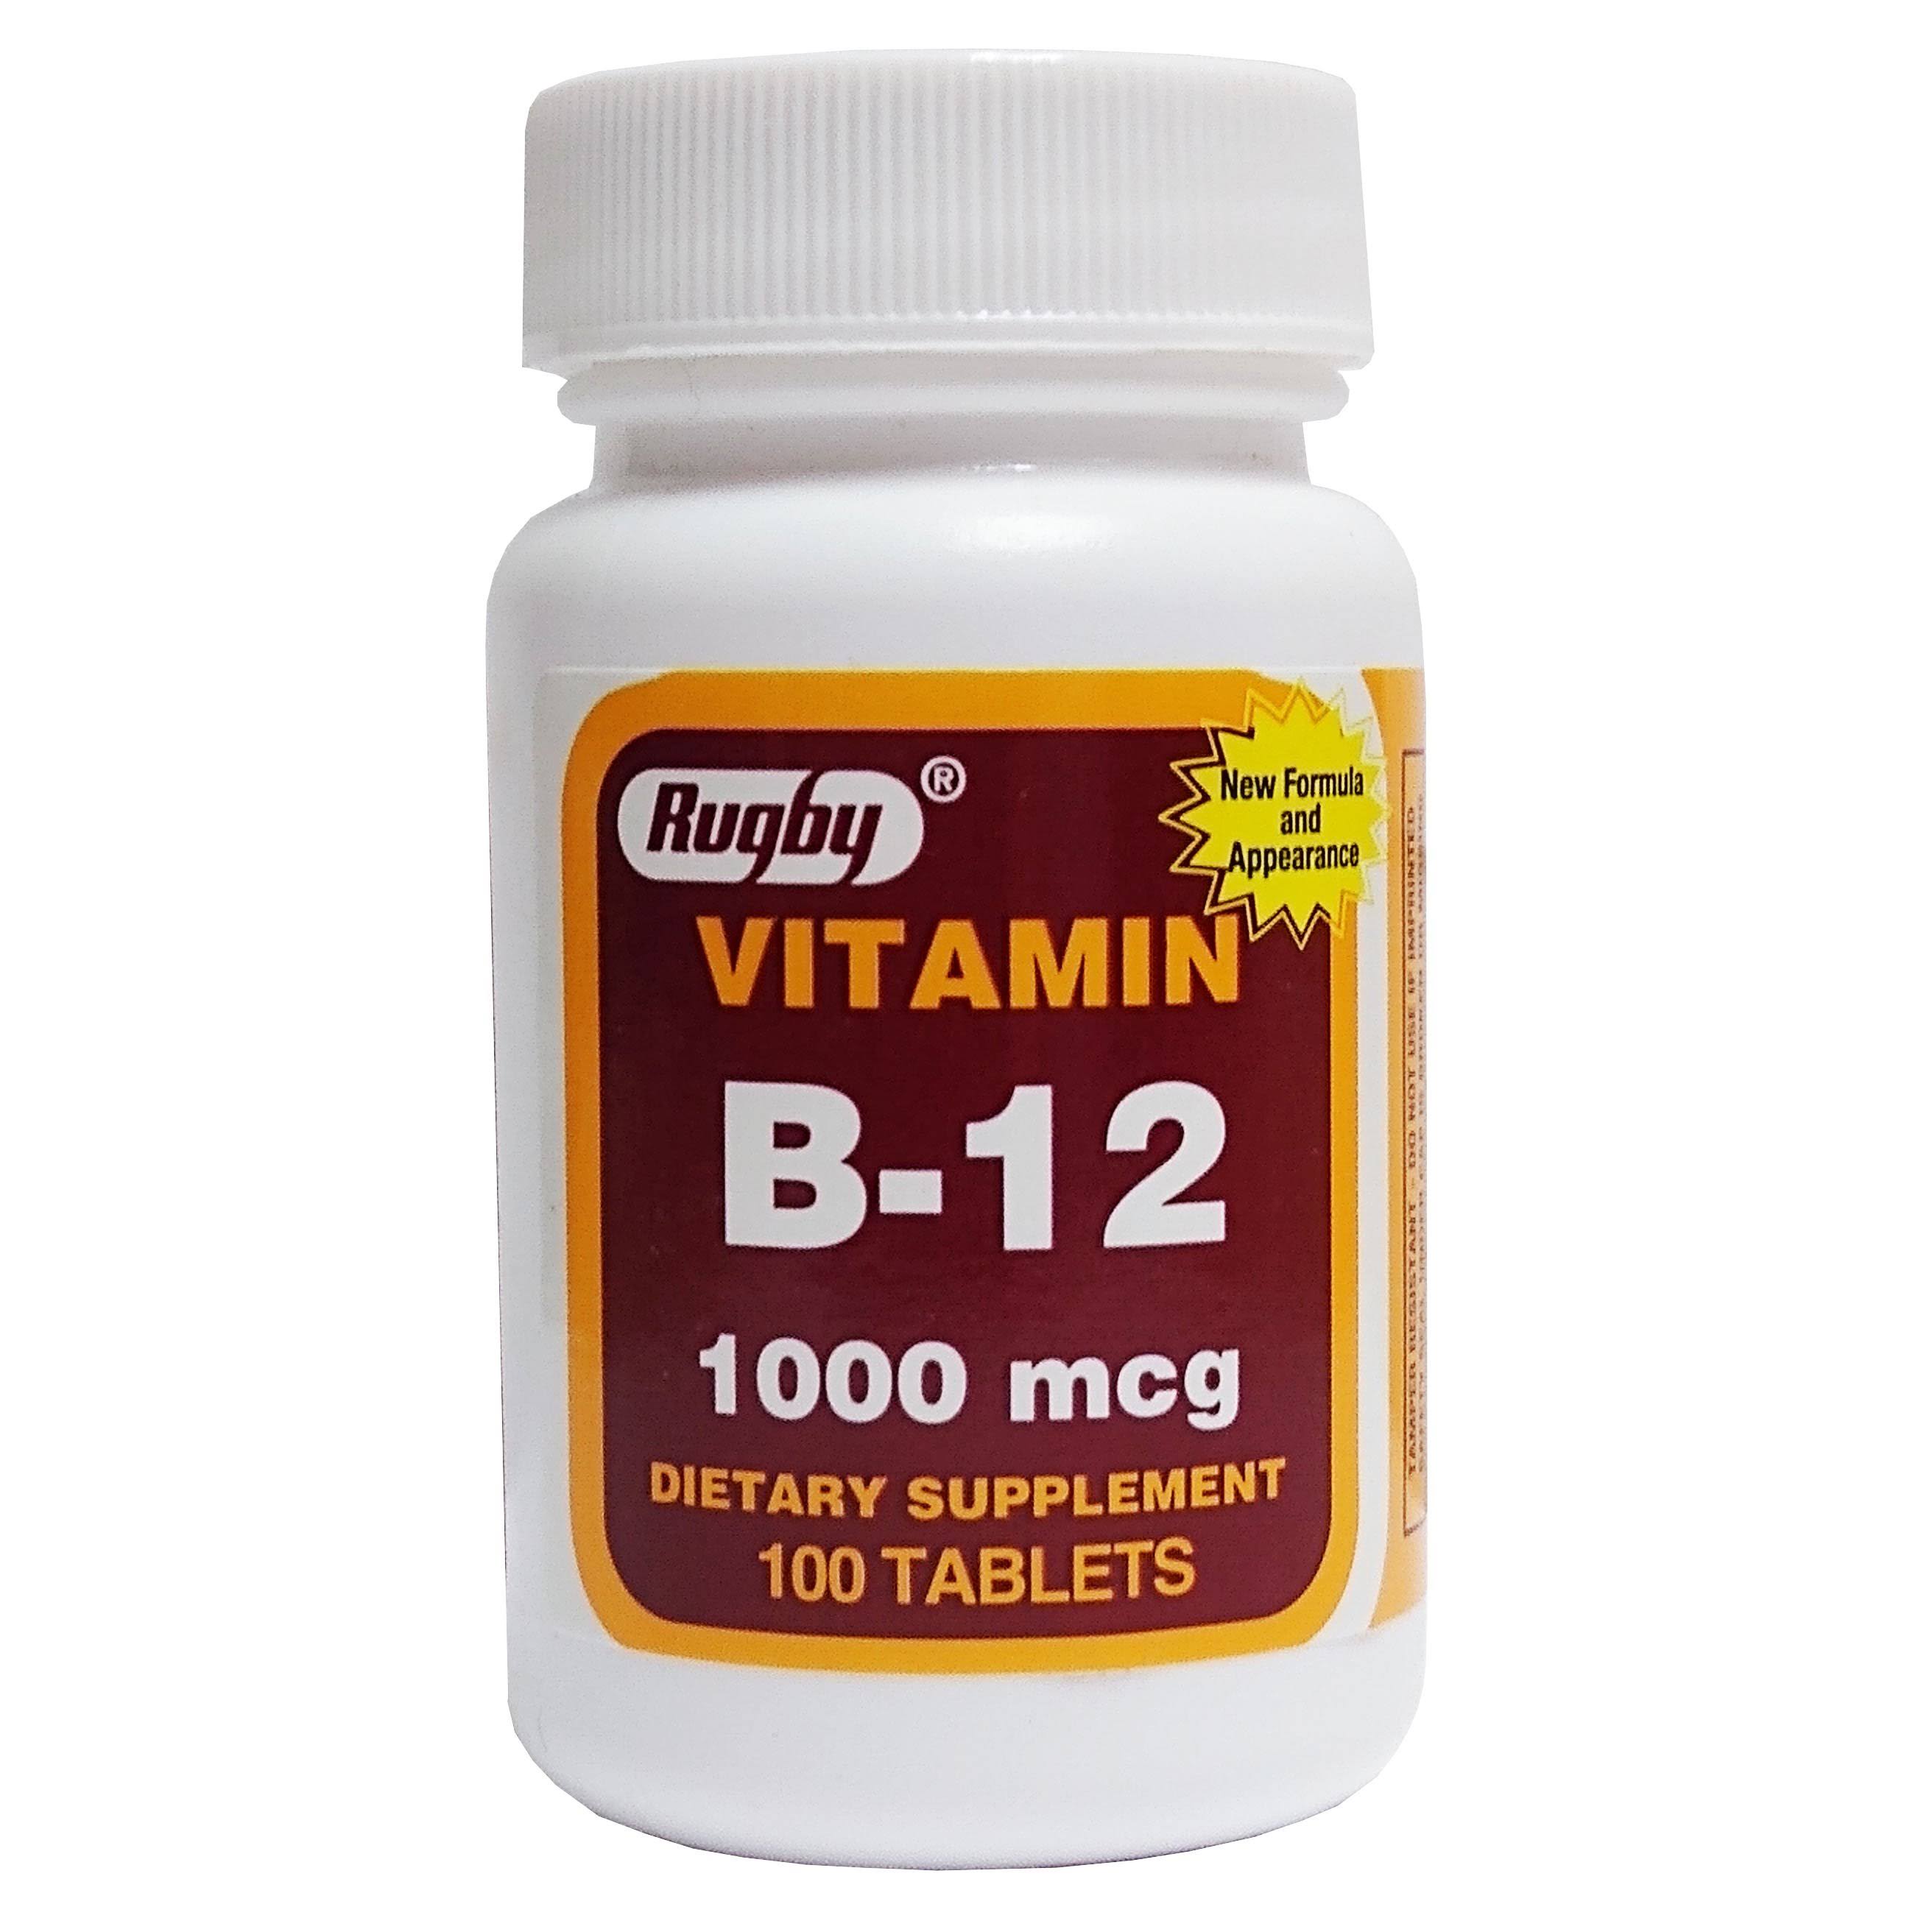 Rugby Vitamin B-12 1000 mcg 100 Tablets, 1 Bottle Each, by Rugby